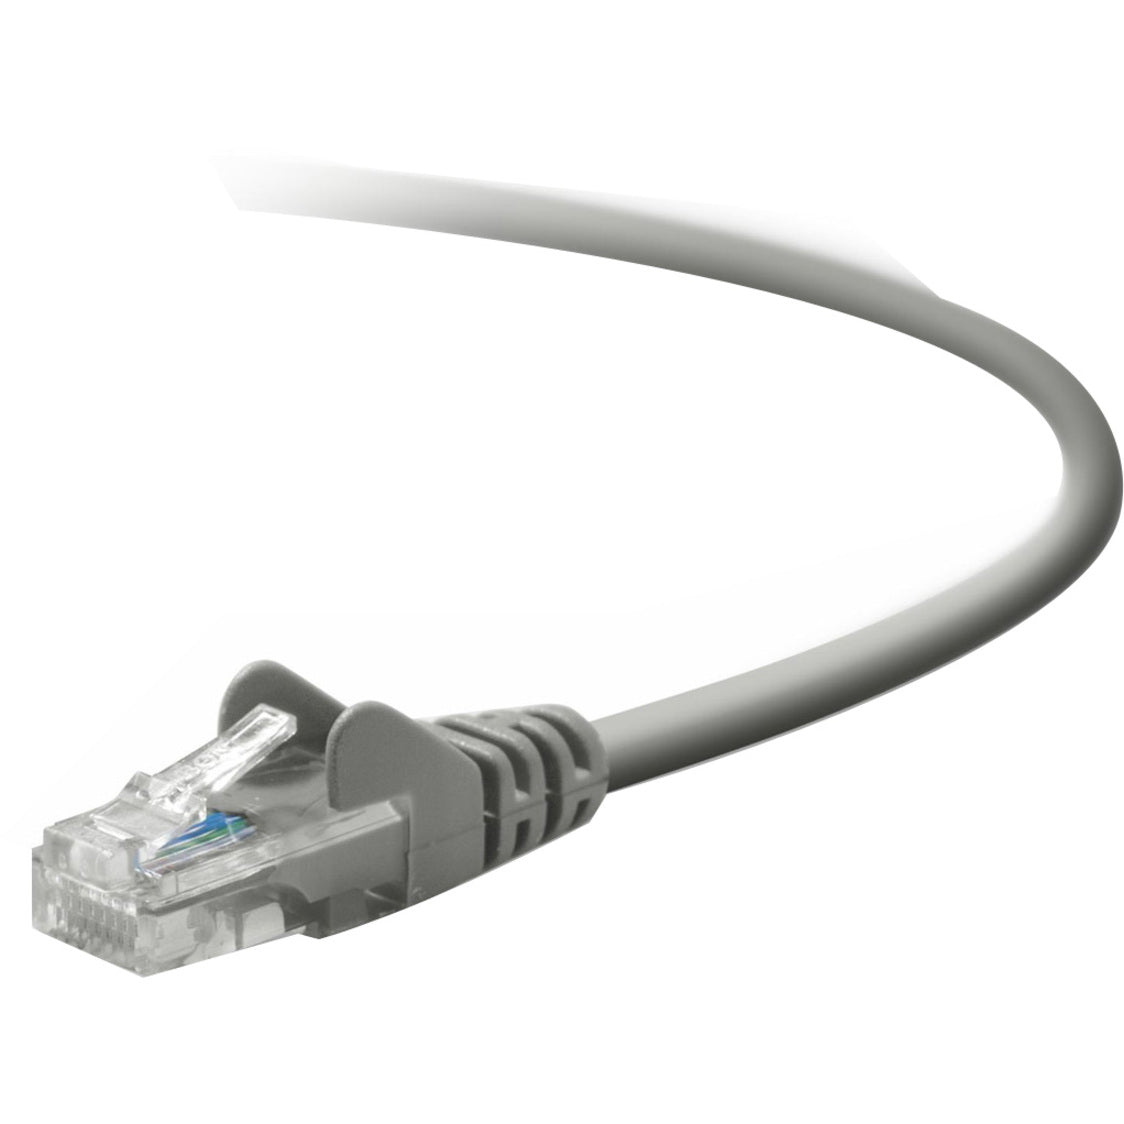 Belkin A3L791-20 Cat5e Network Cable, 20 ft, Fast and Reliable Transmission